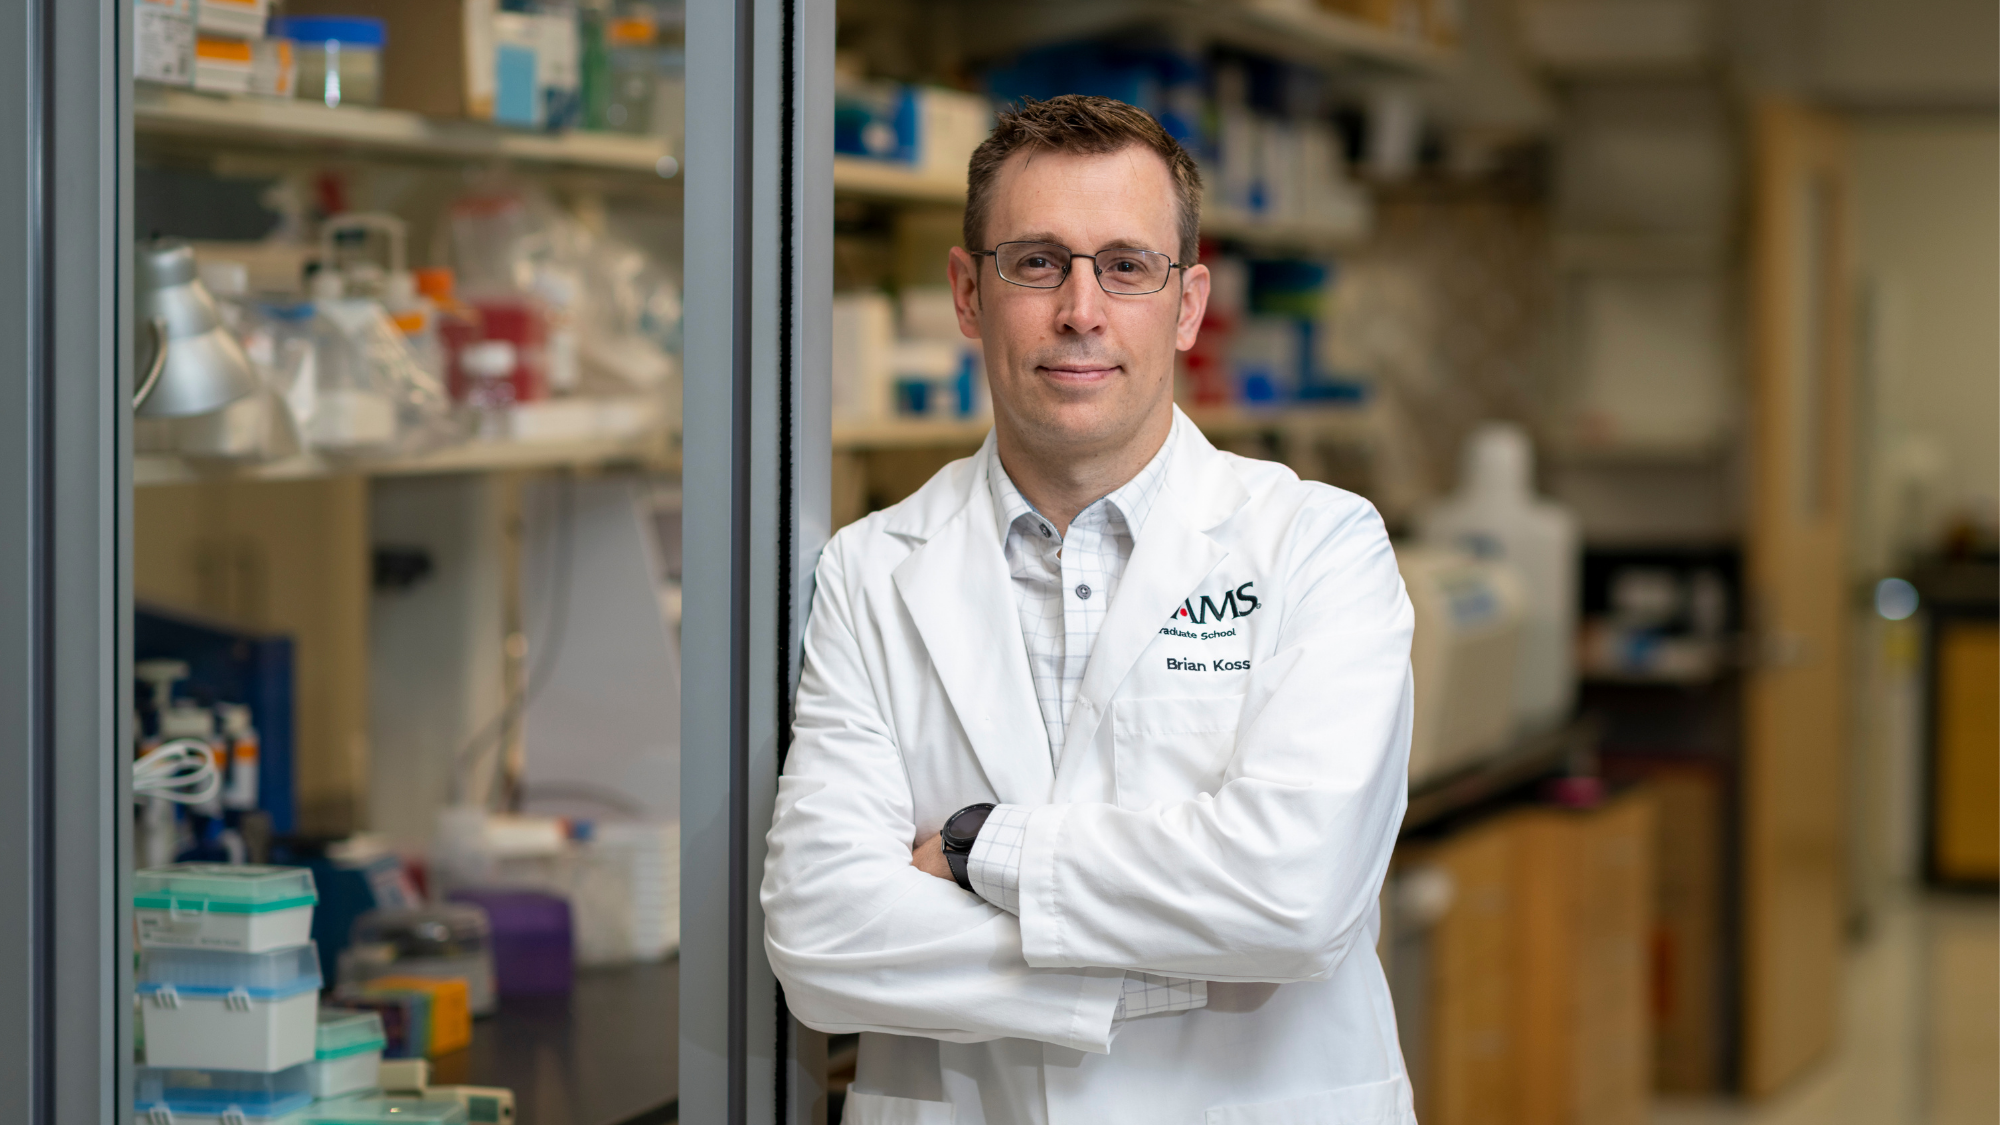 Brian Koss, Ph.D., a researcher with the UAMS Winthrop P. Rockefeller Cancer Institute, is the state’s first recipient of the prestigious National Institutes of Health (NIH) Director’s Early Independence Award.